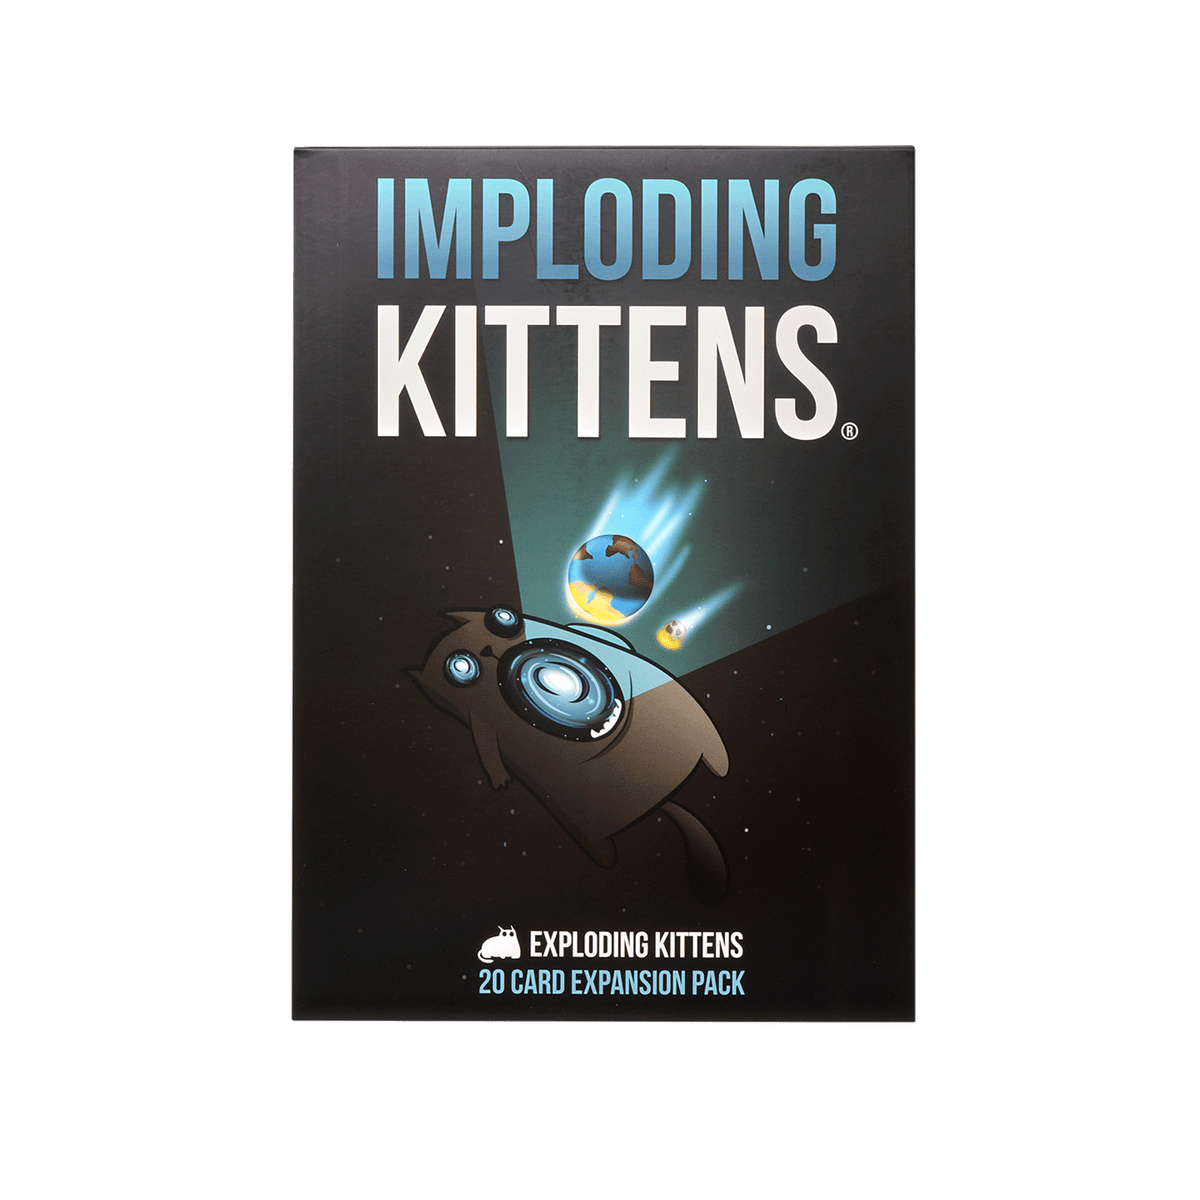 Exploding Kittens® Original Edition Card Game, 1 ct - Fred Meyer